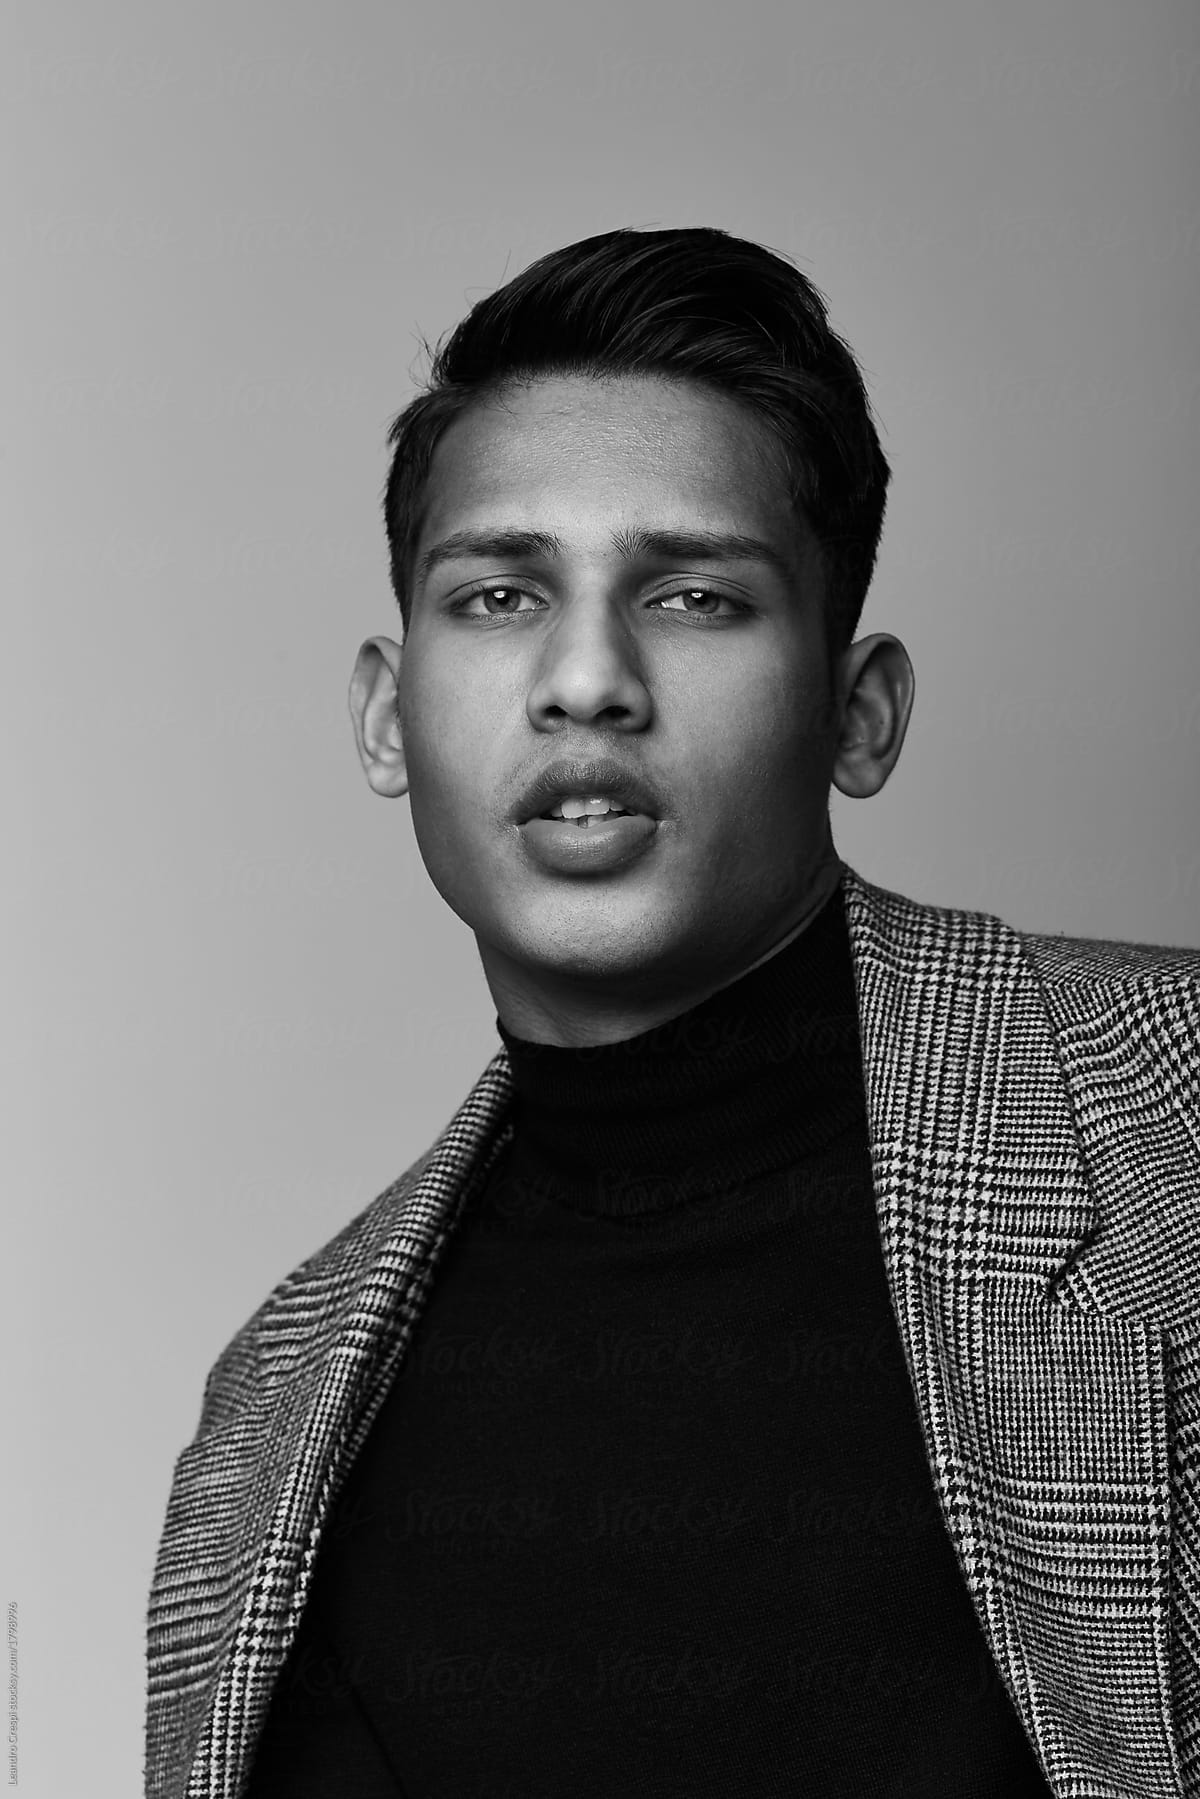 Handsome Indian guy portrait wearing turtle neck and coat on black and white